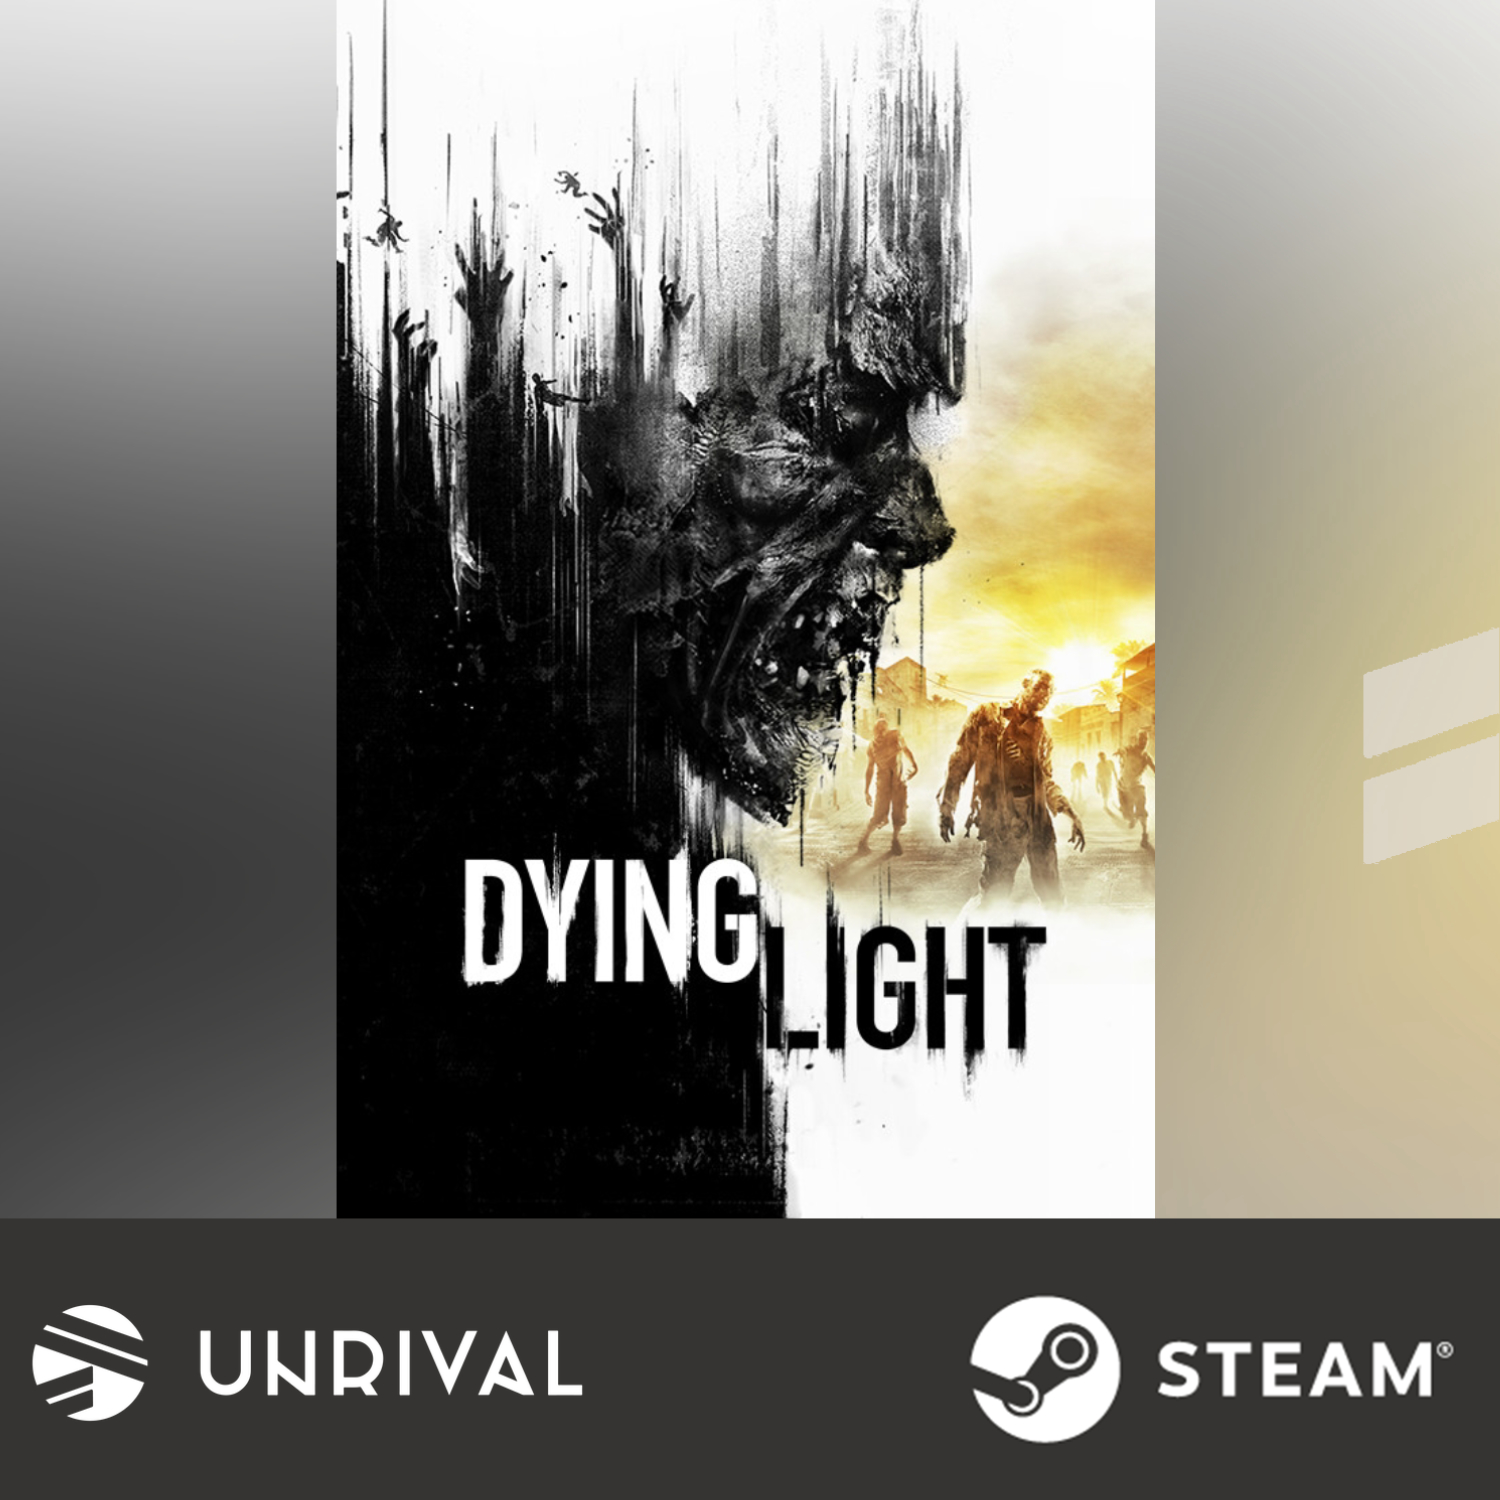 Dying Light - Hellraid (DLC) PC Digital Download Game - Unrival